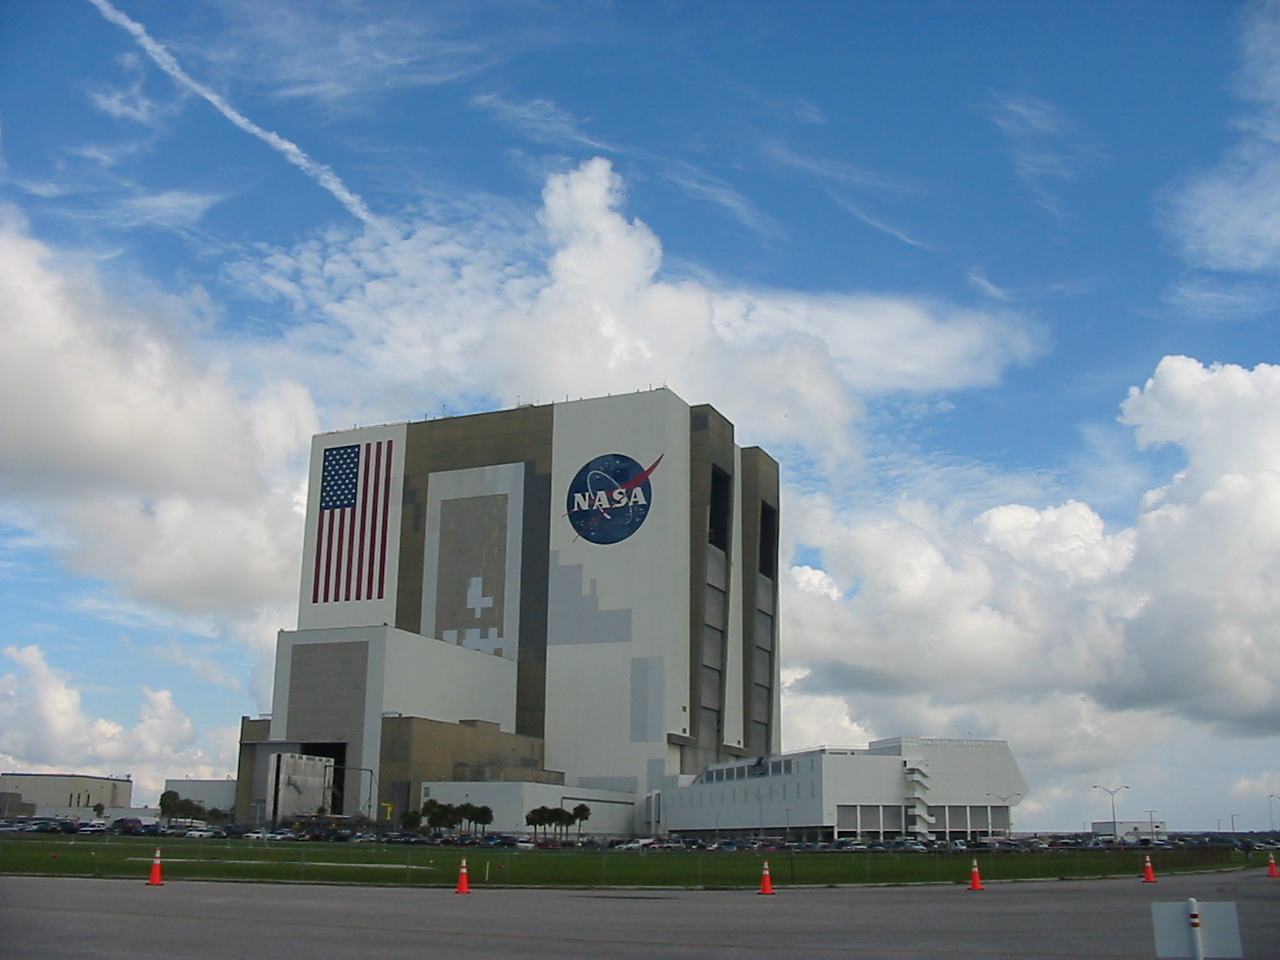 nasa headquarters building with flag flying high up in the sky